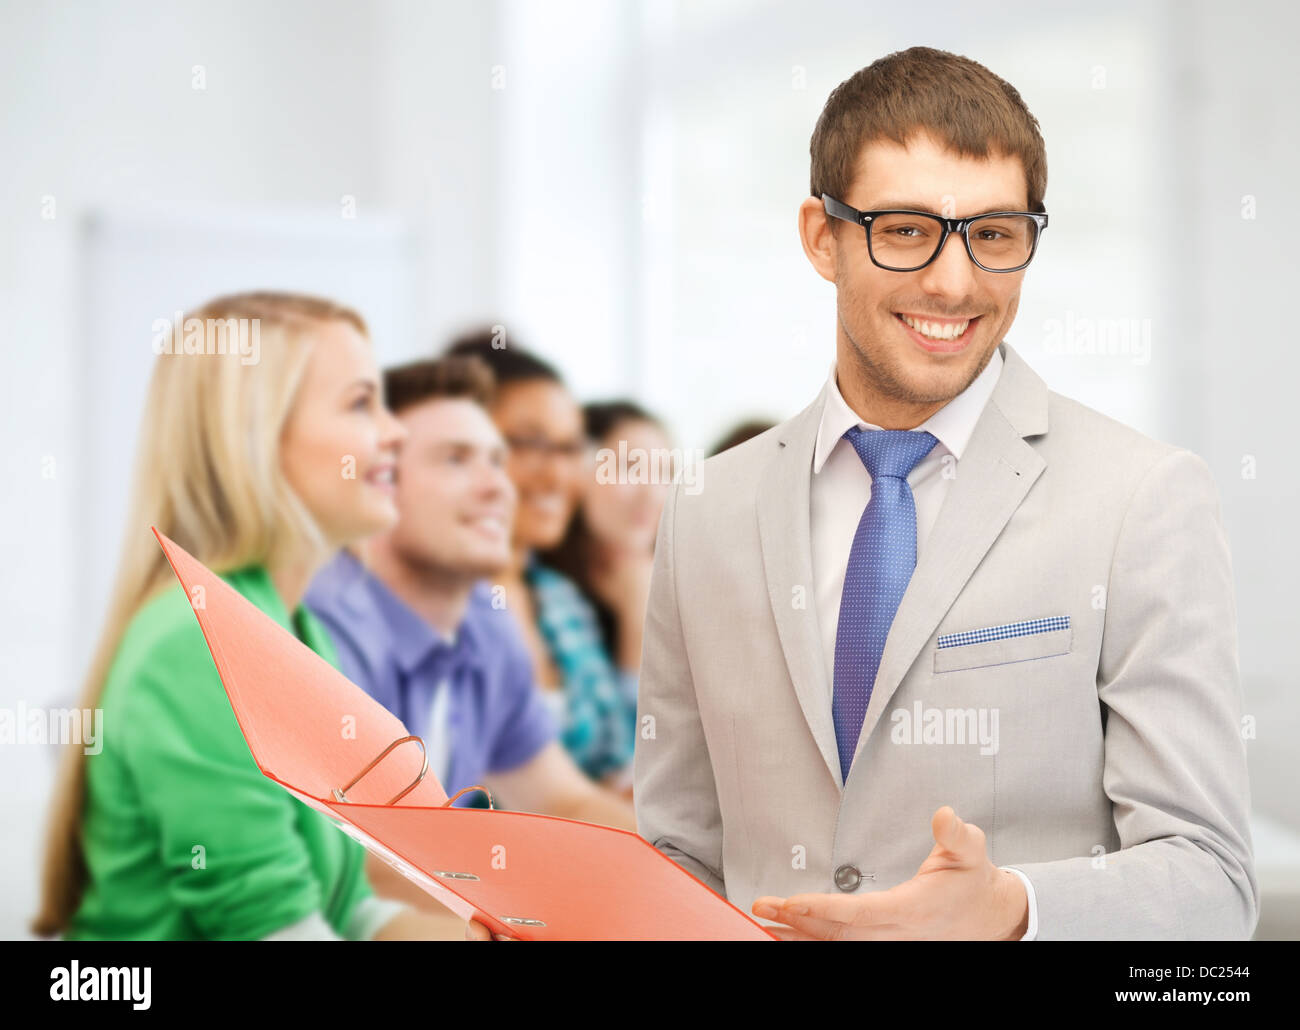 teacher doing lecture at school Stock Photo